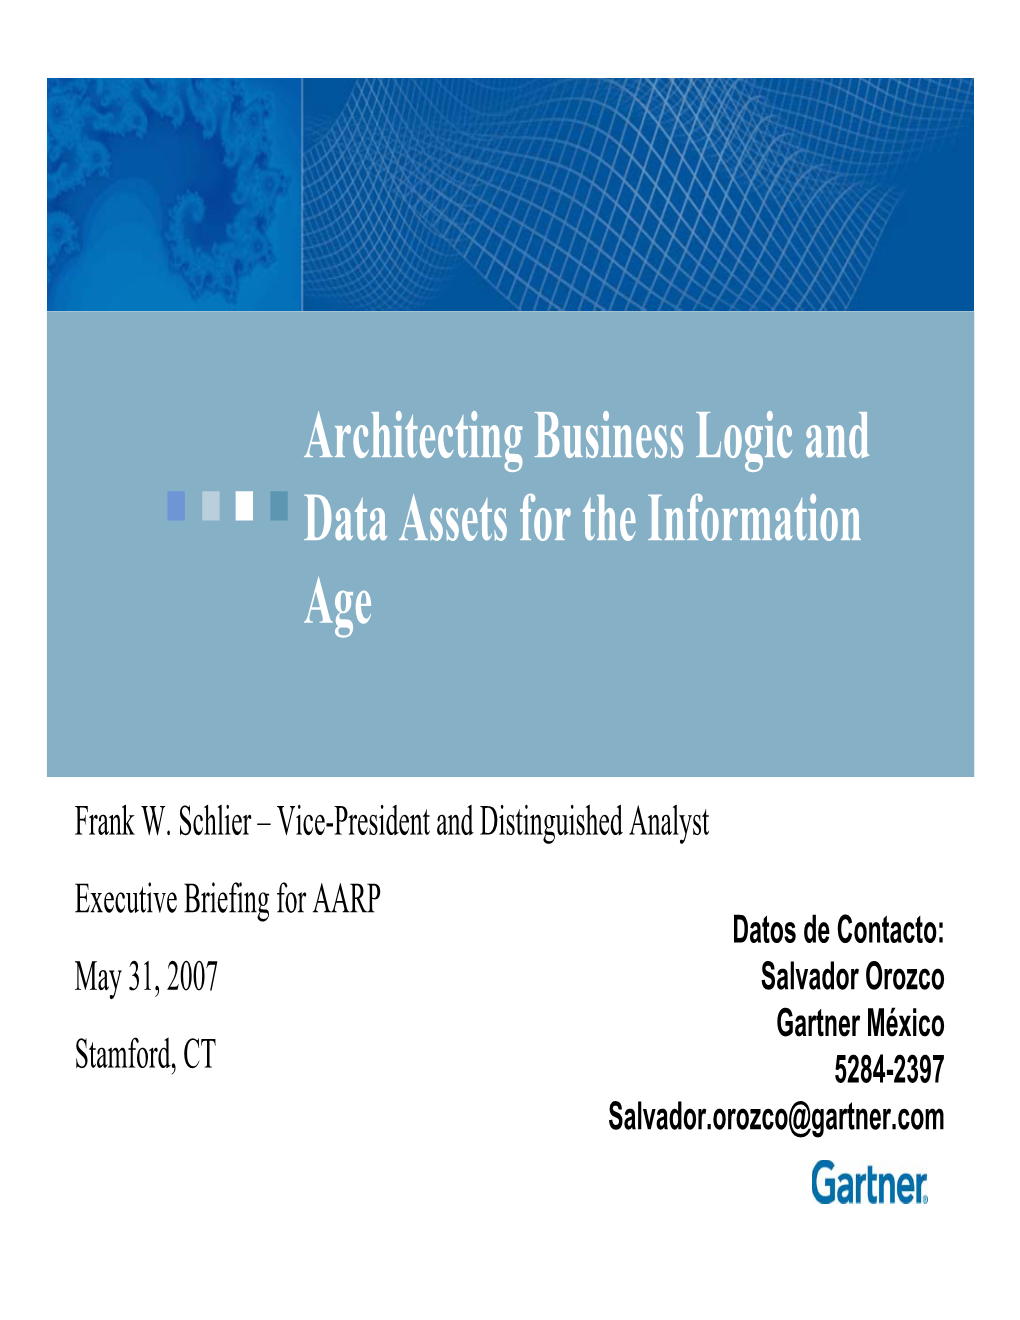 Architecting Business Logic and Data Assets for the Information Age